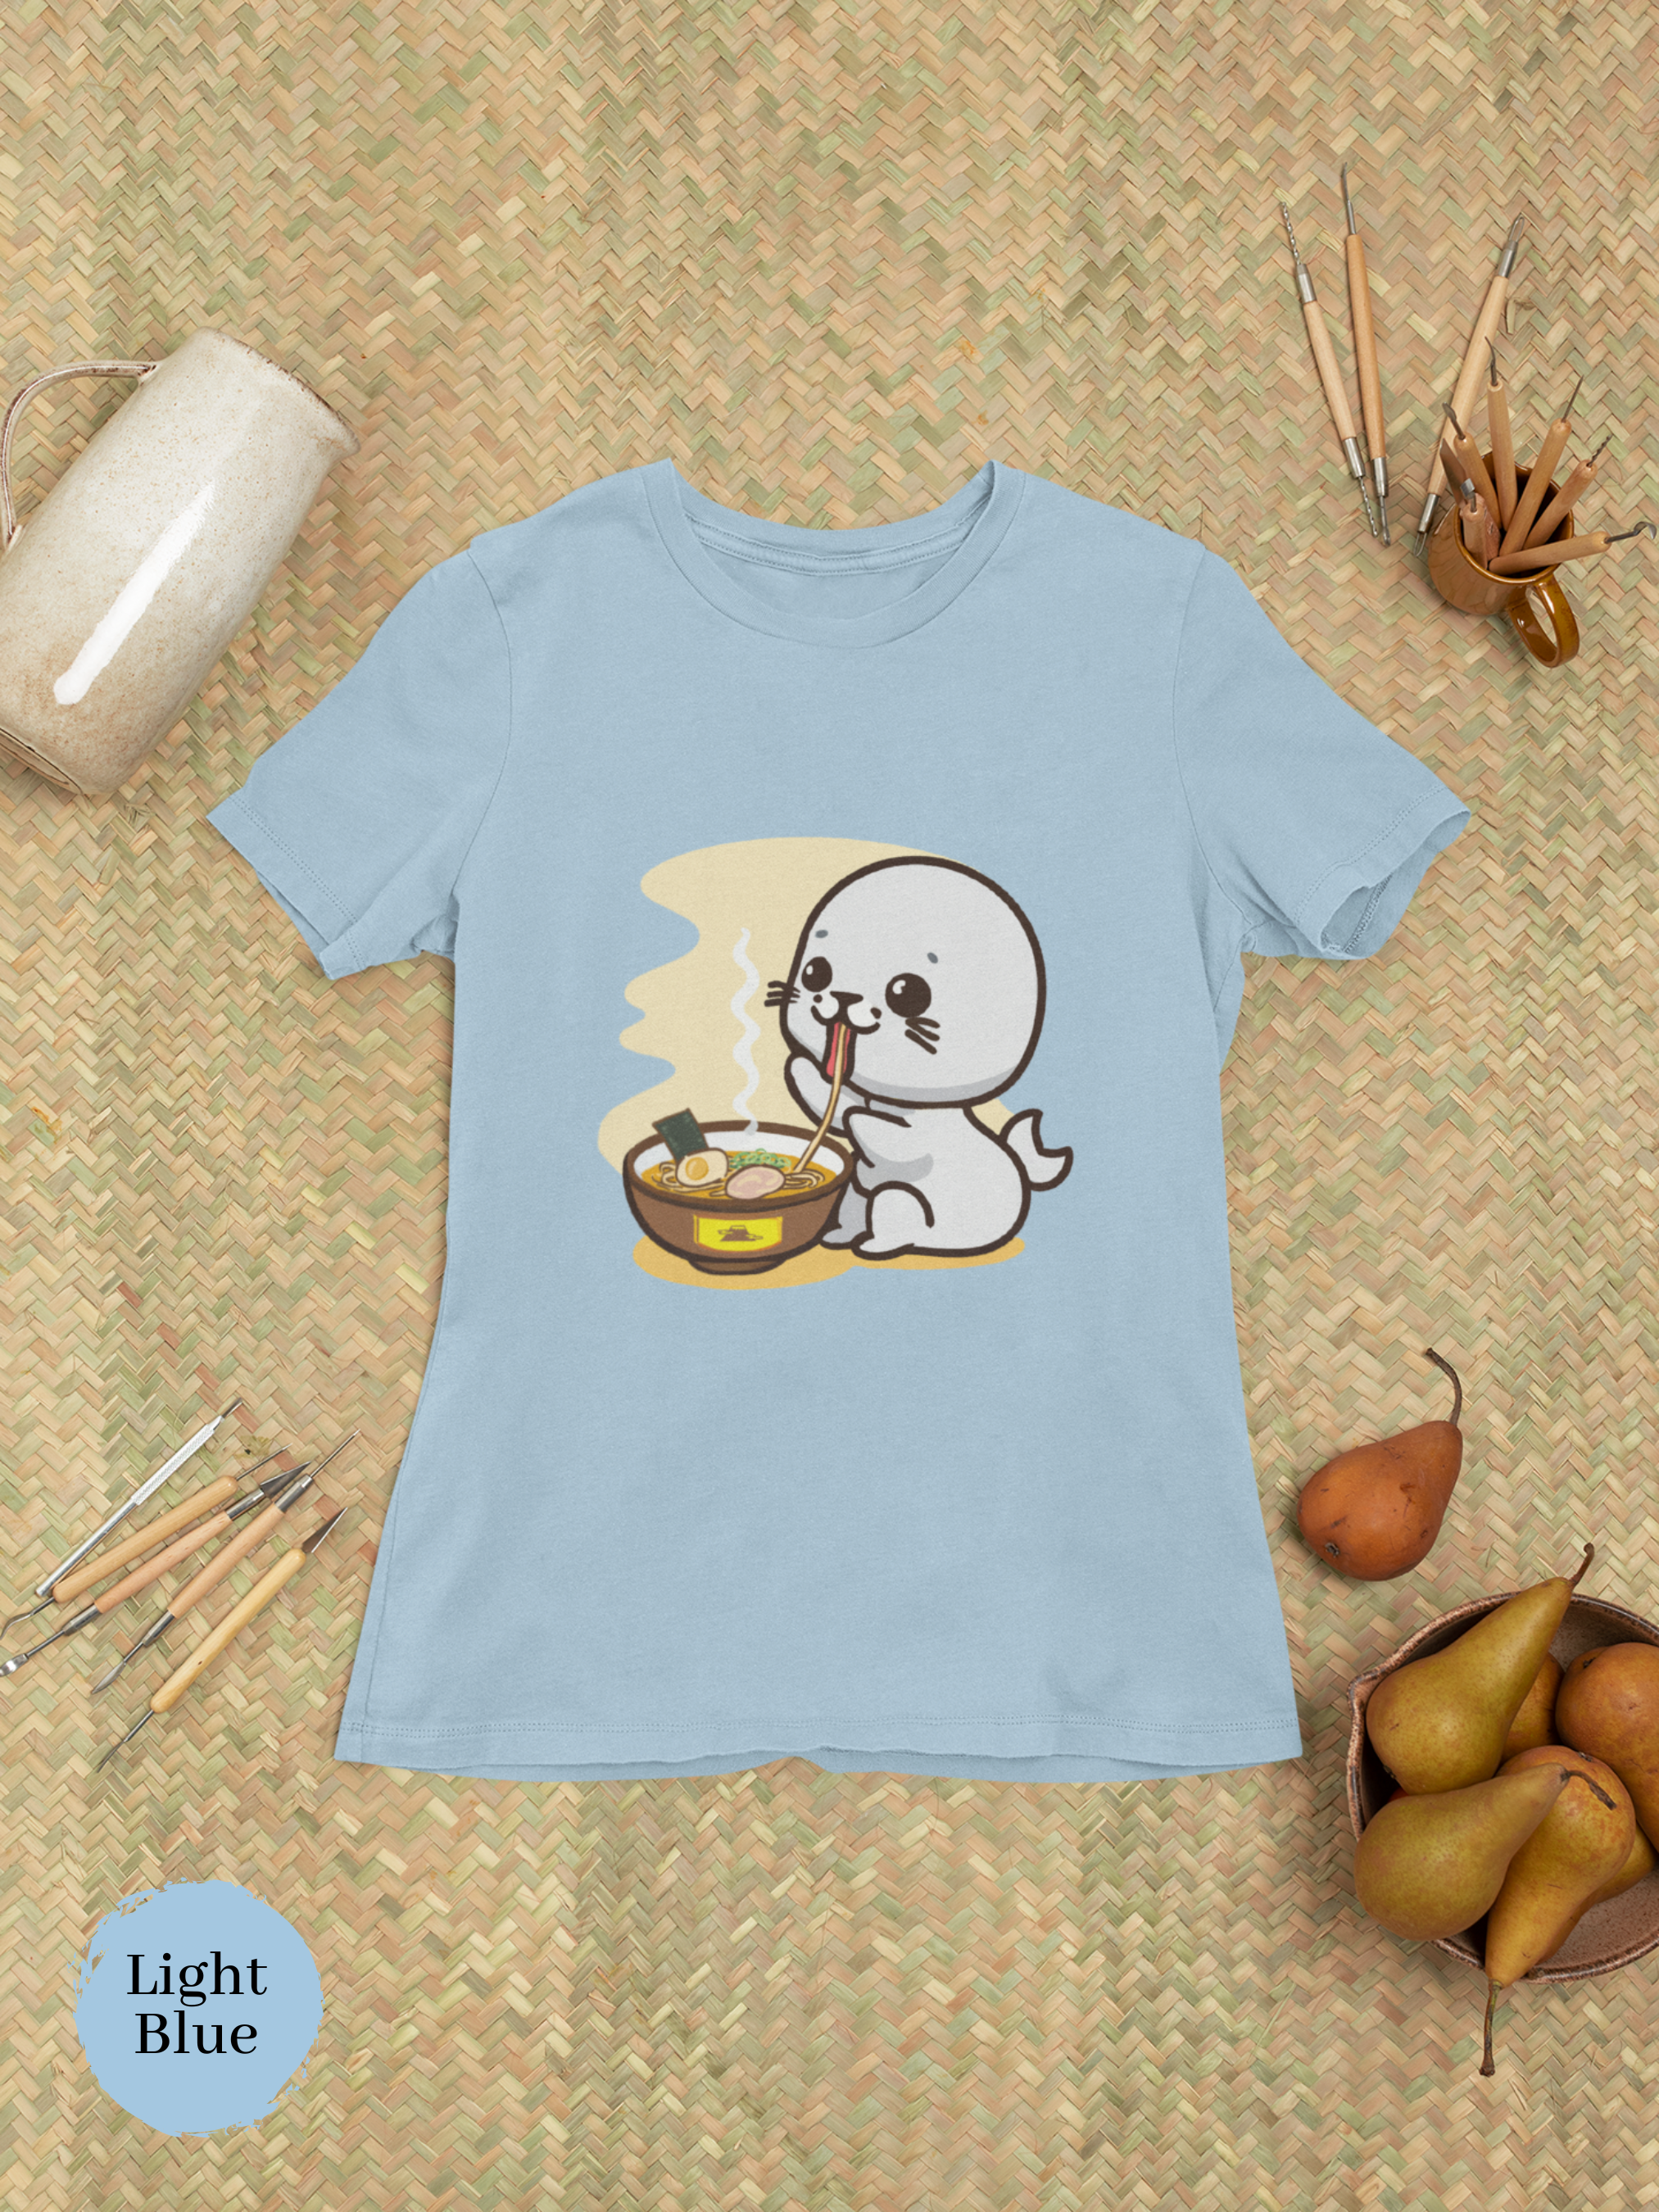 Ramen T-shirt with Adorable Baby Seal: A Unique Japanese Foodie Shirt with Ramen Art